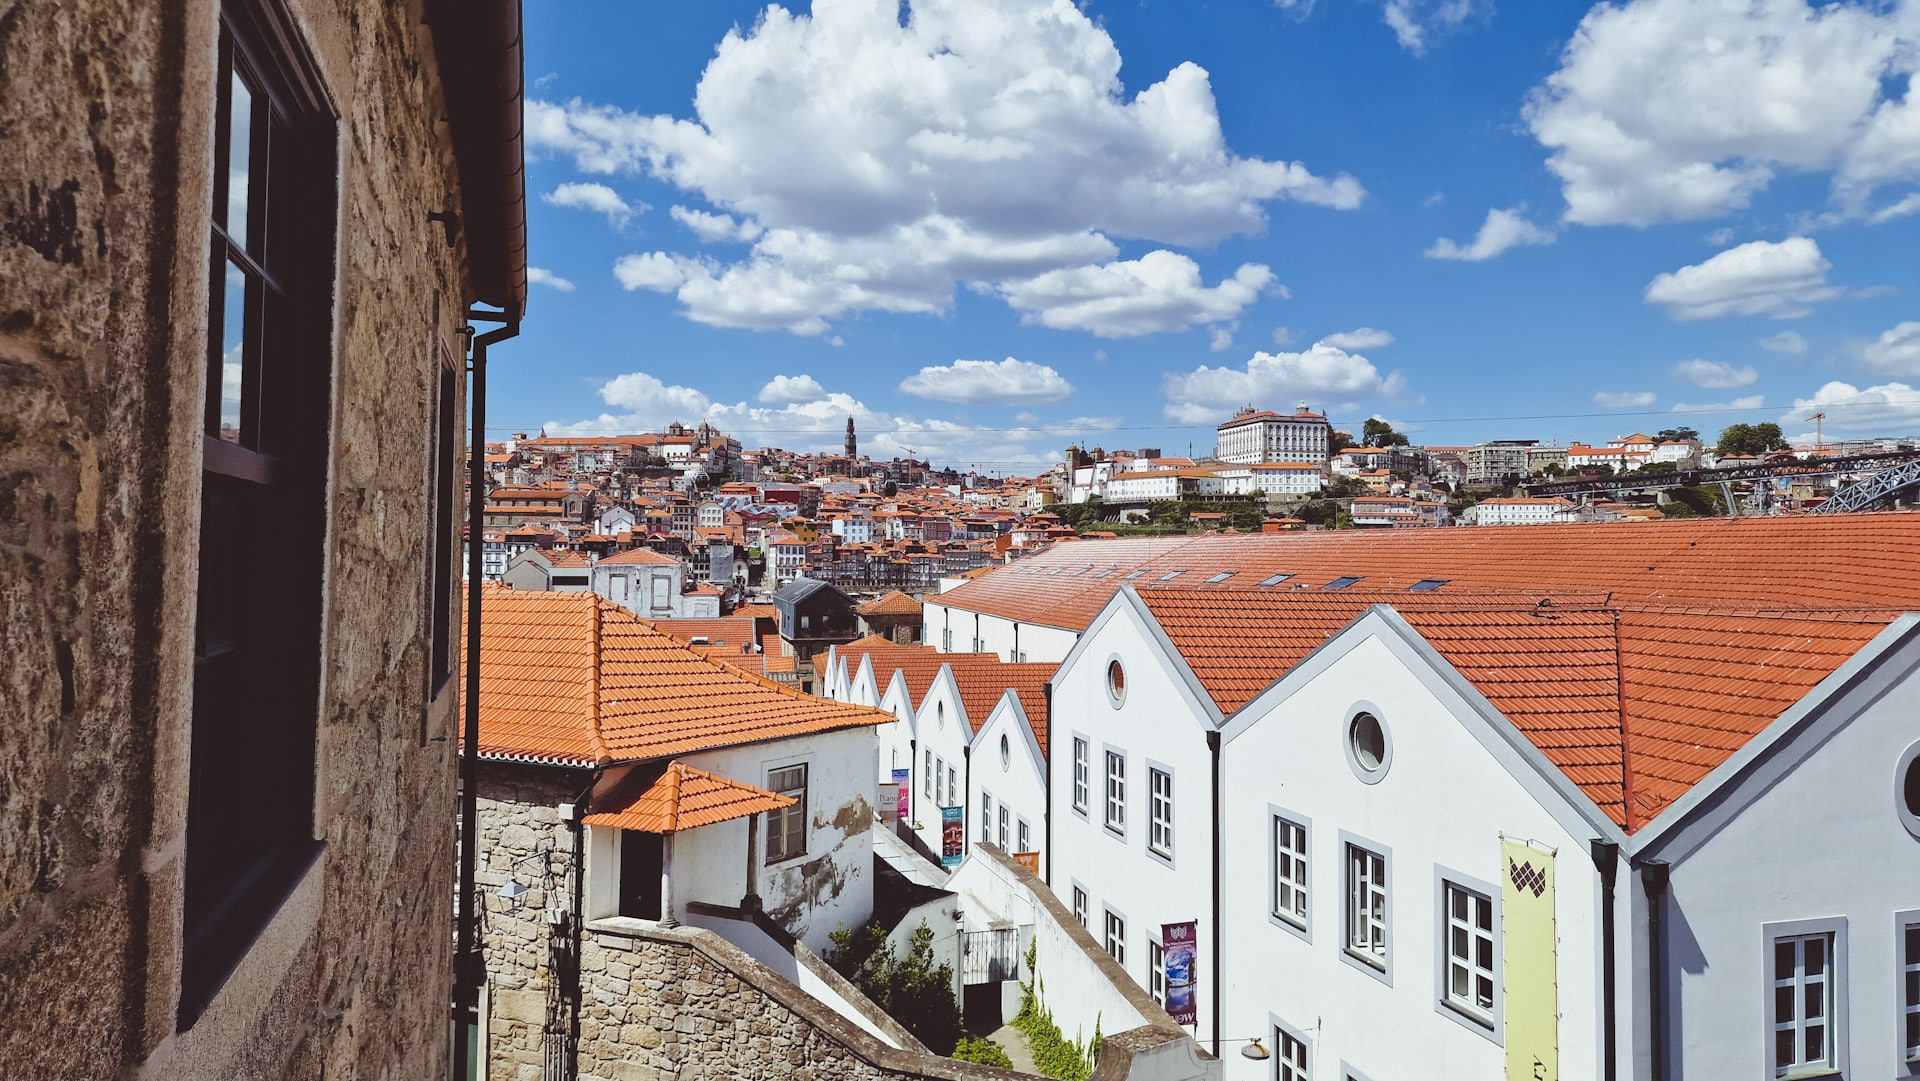 Located across the Douro from the city center, Vila Nova de Gaia is one of the best areas to stay in Porto